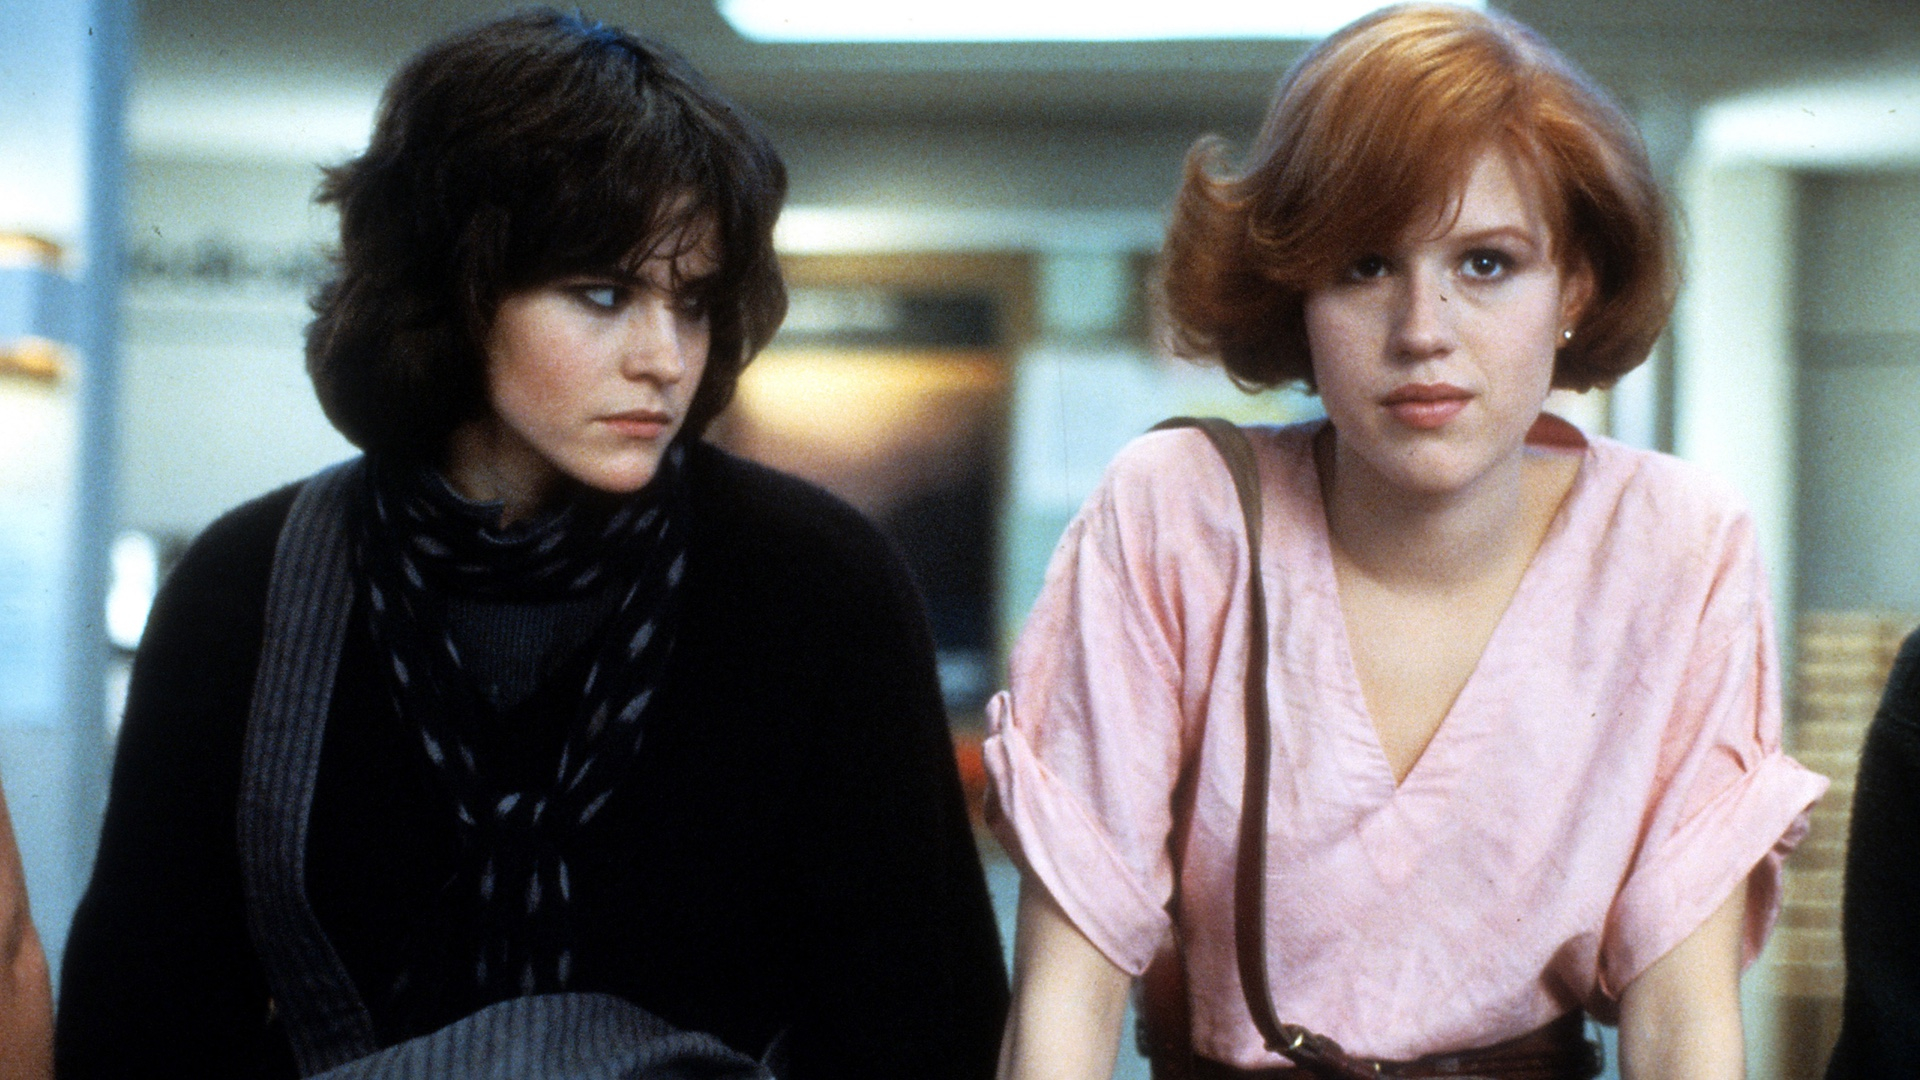 1920x1080 A Deleted Scene From THE BREAKFAST CLUB Surfaces After 30 Years &acirc;&#128;&#148; GeekTyrant